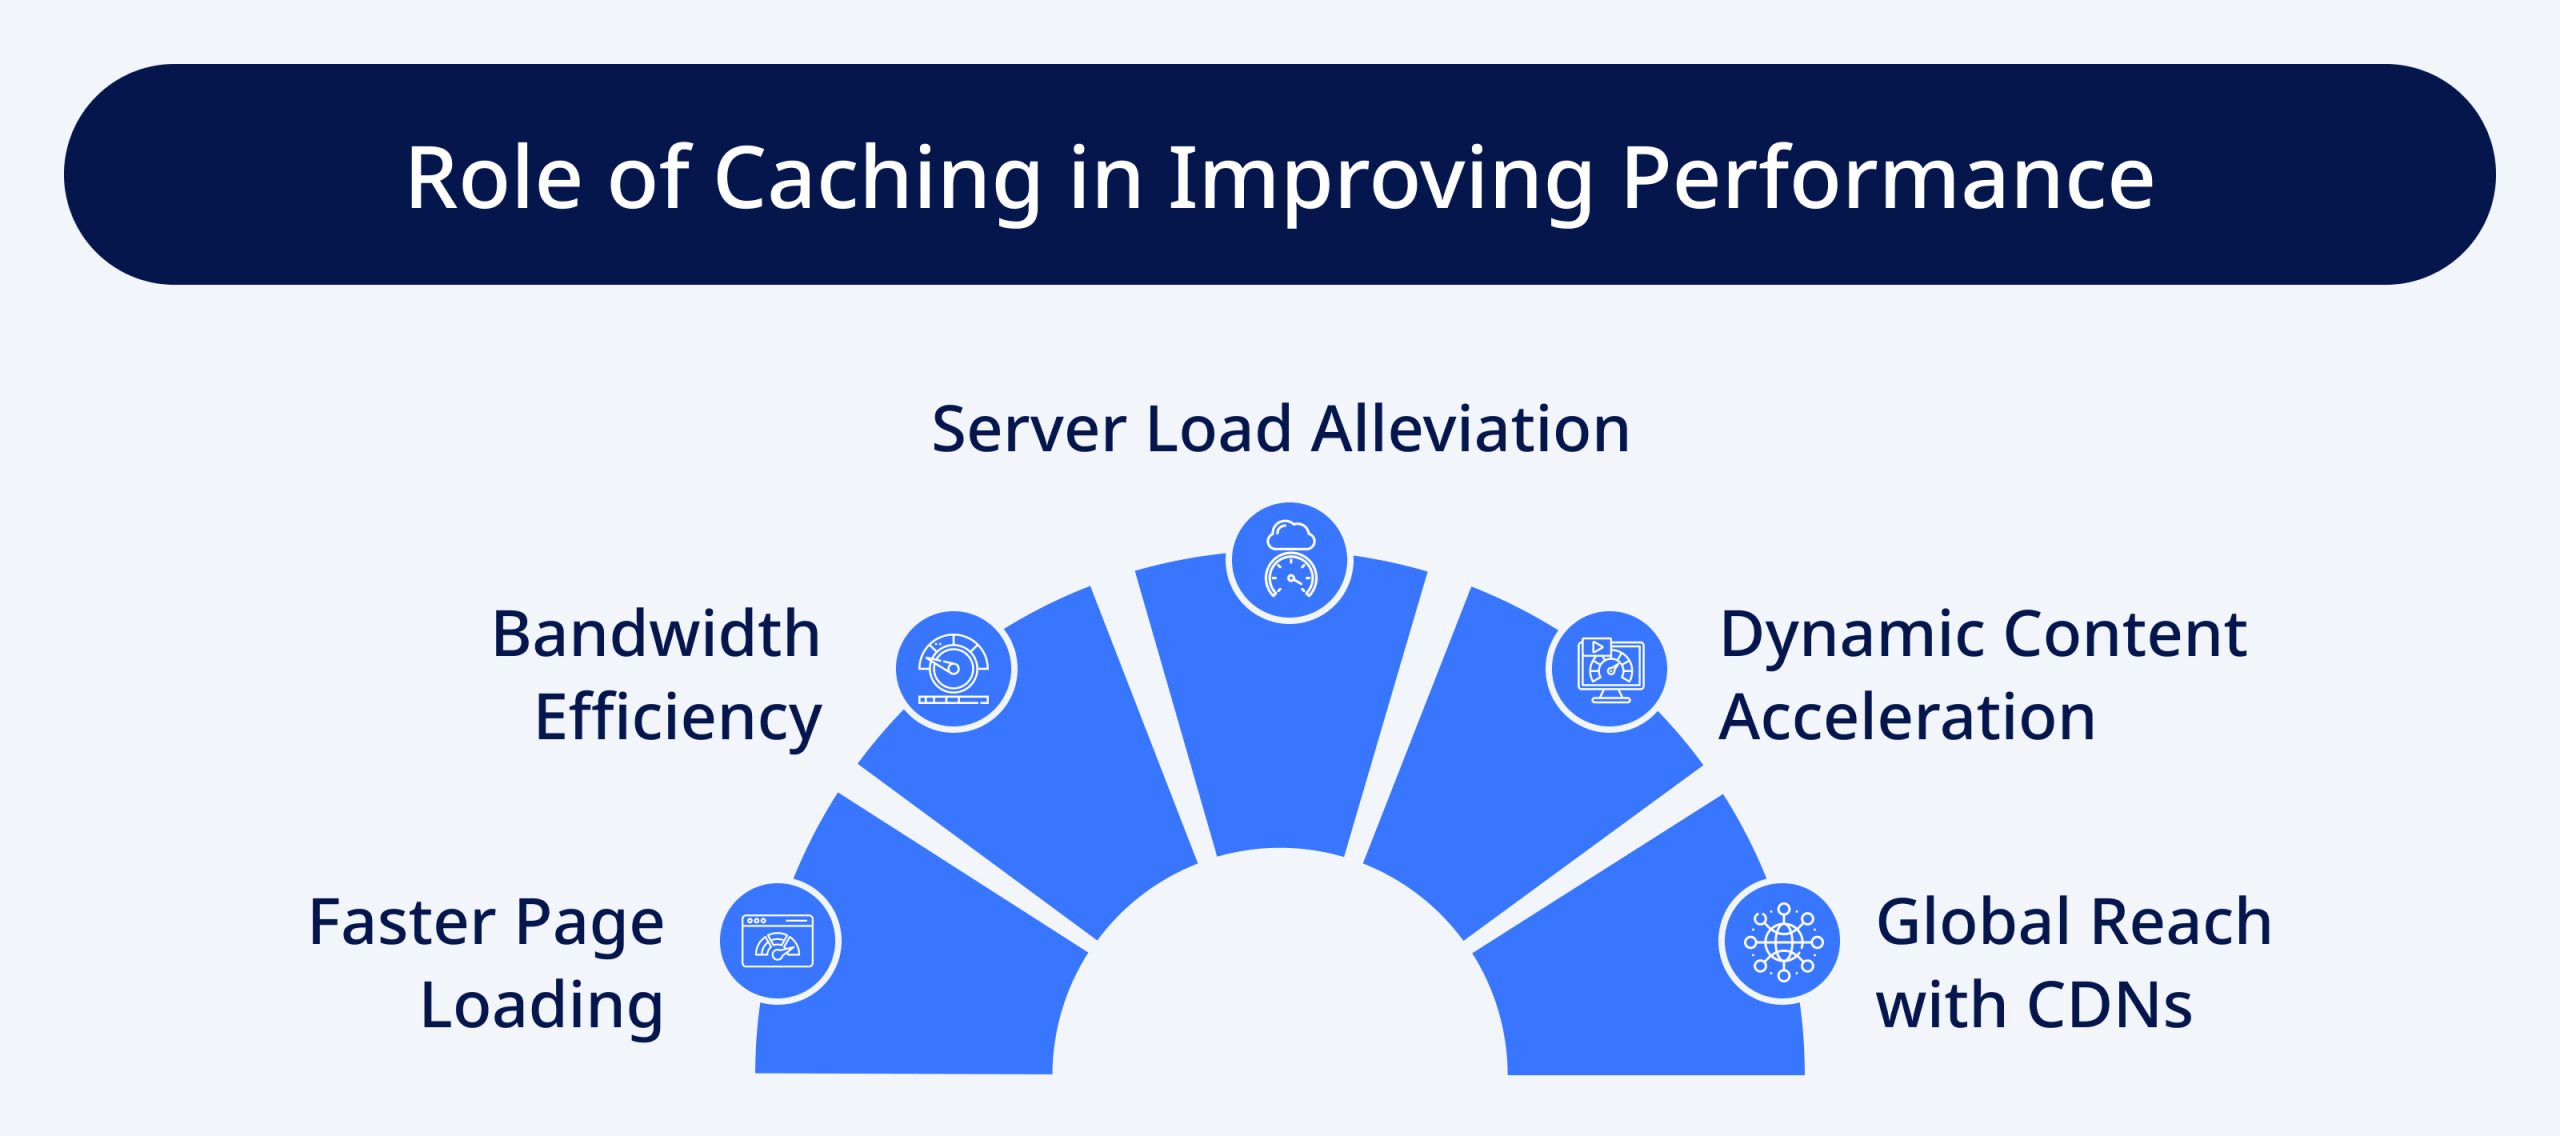 Role of Caching in Improving Performance